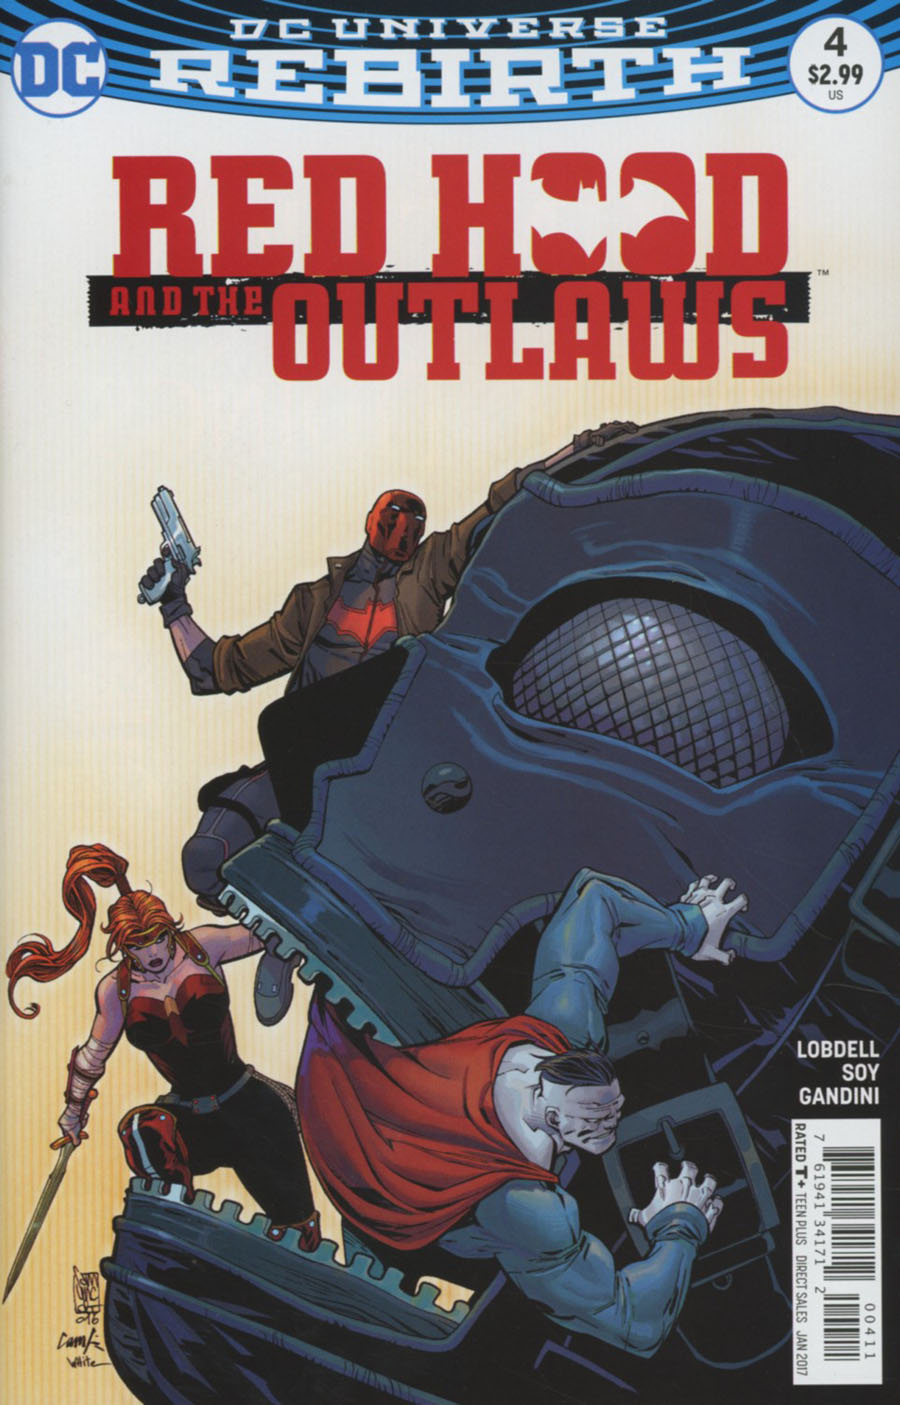 Red Hood & The Outlaws #4